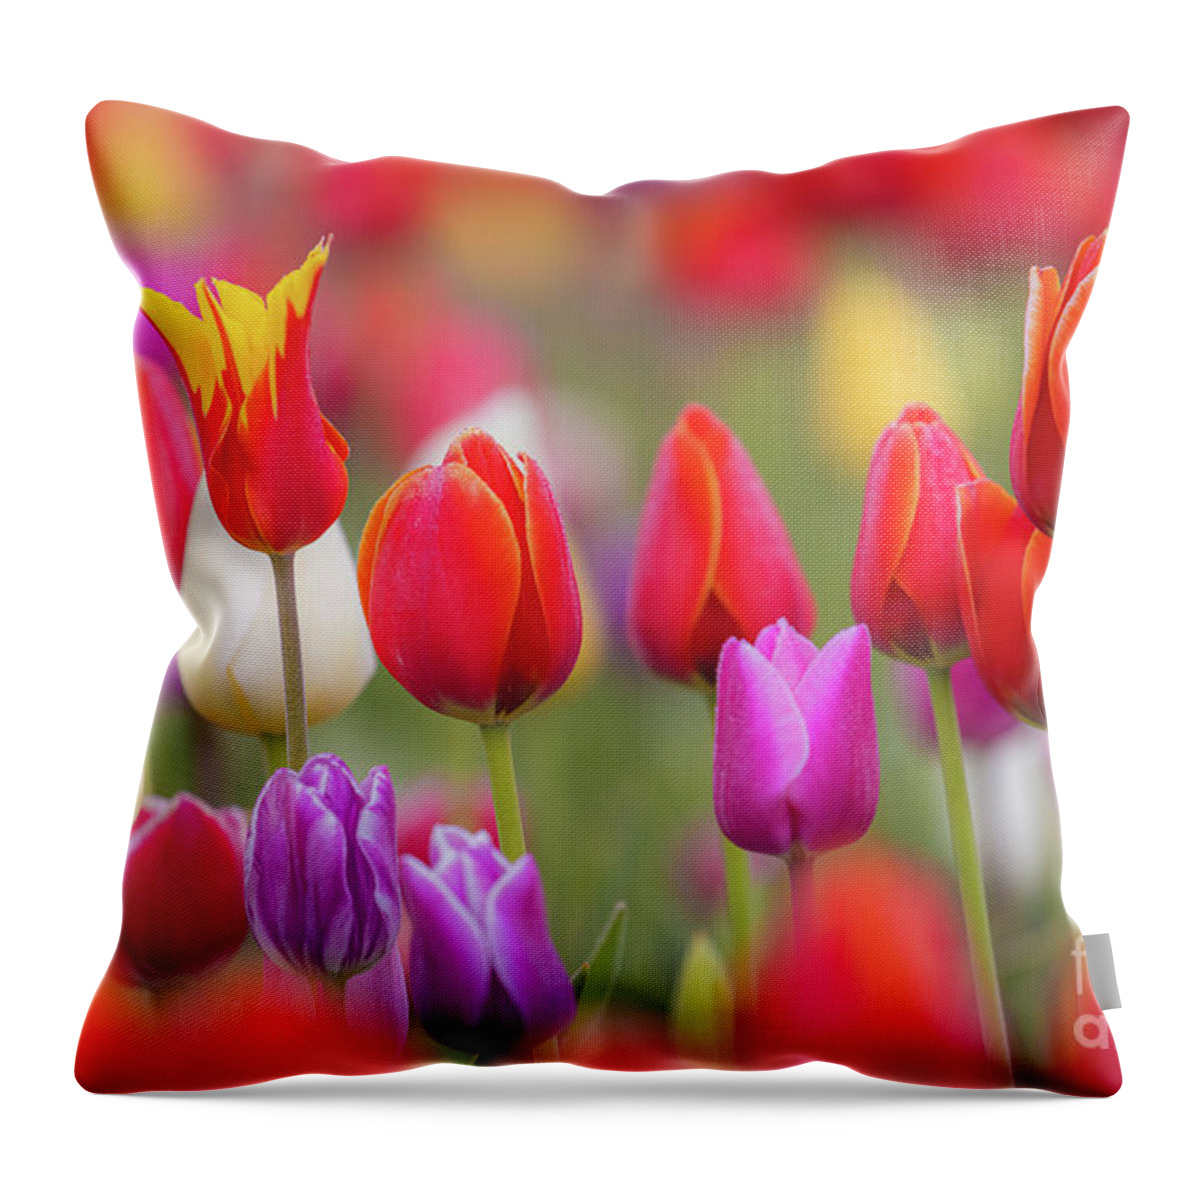 America Throw Pillow featuring the photograph Tulip Study 1 by Inge Johnsson